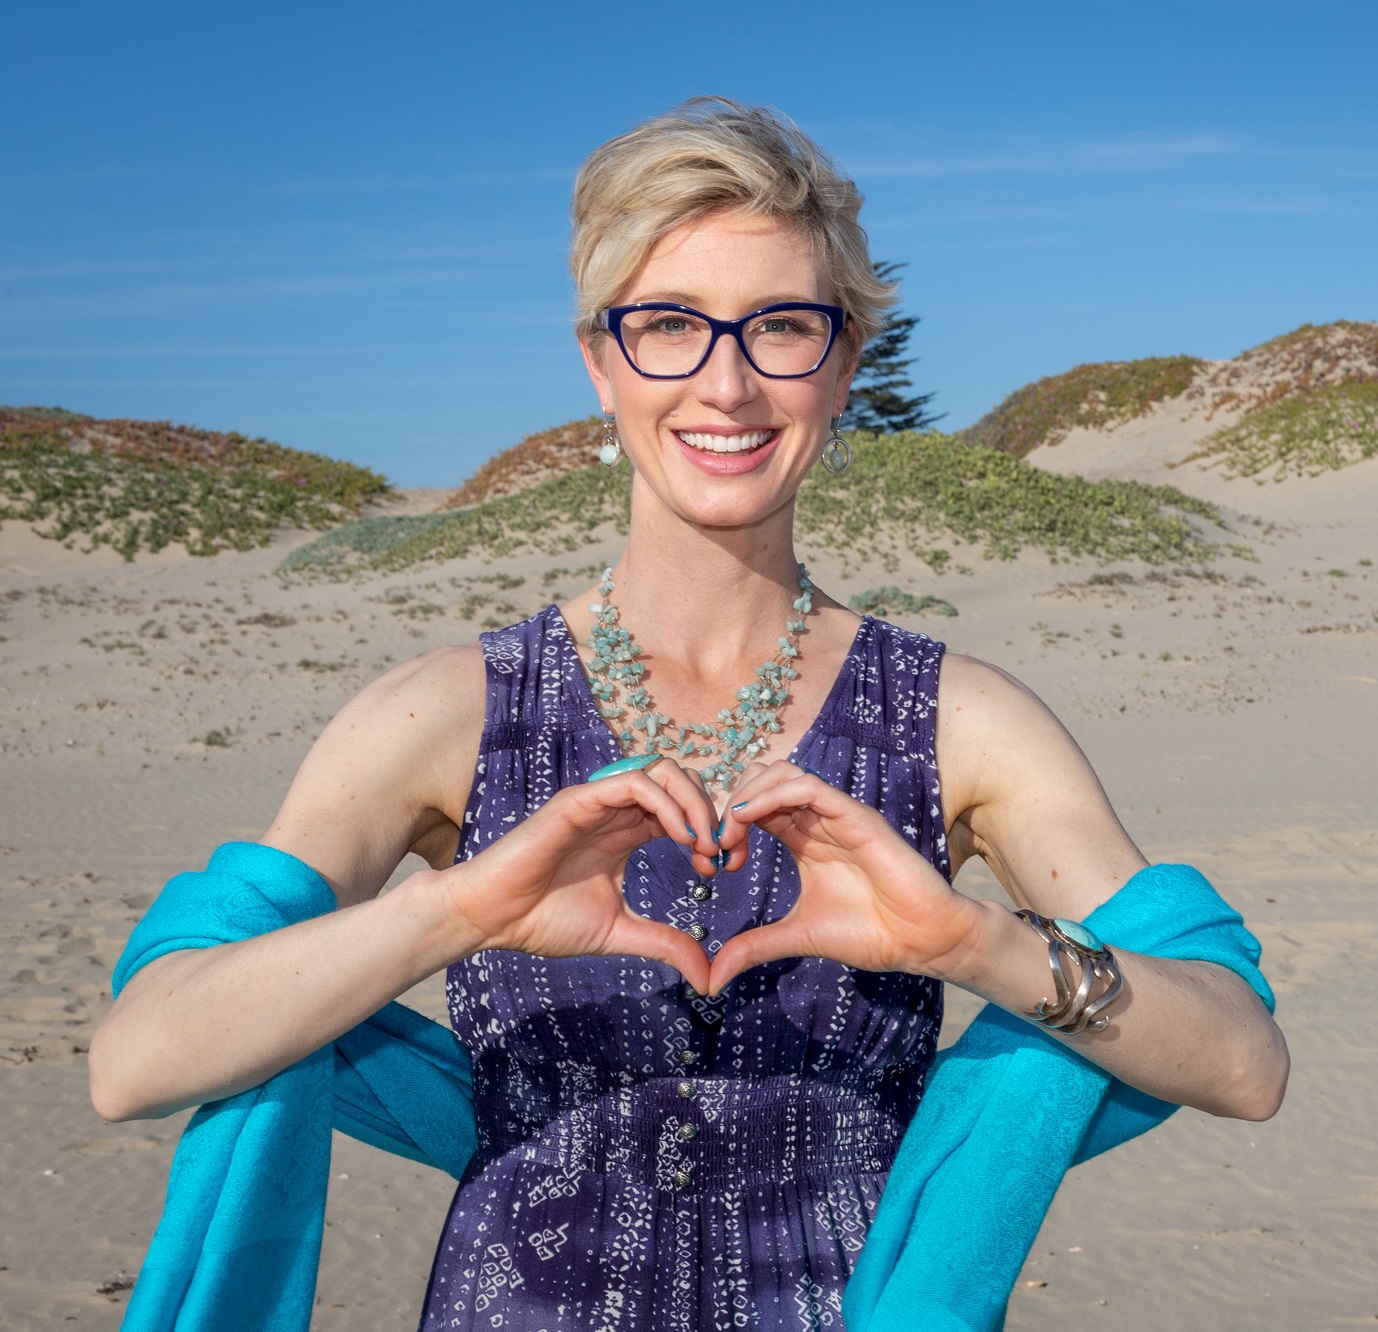 Megan Barnhard on a beach with her hands formed into a heart